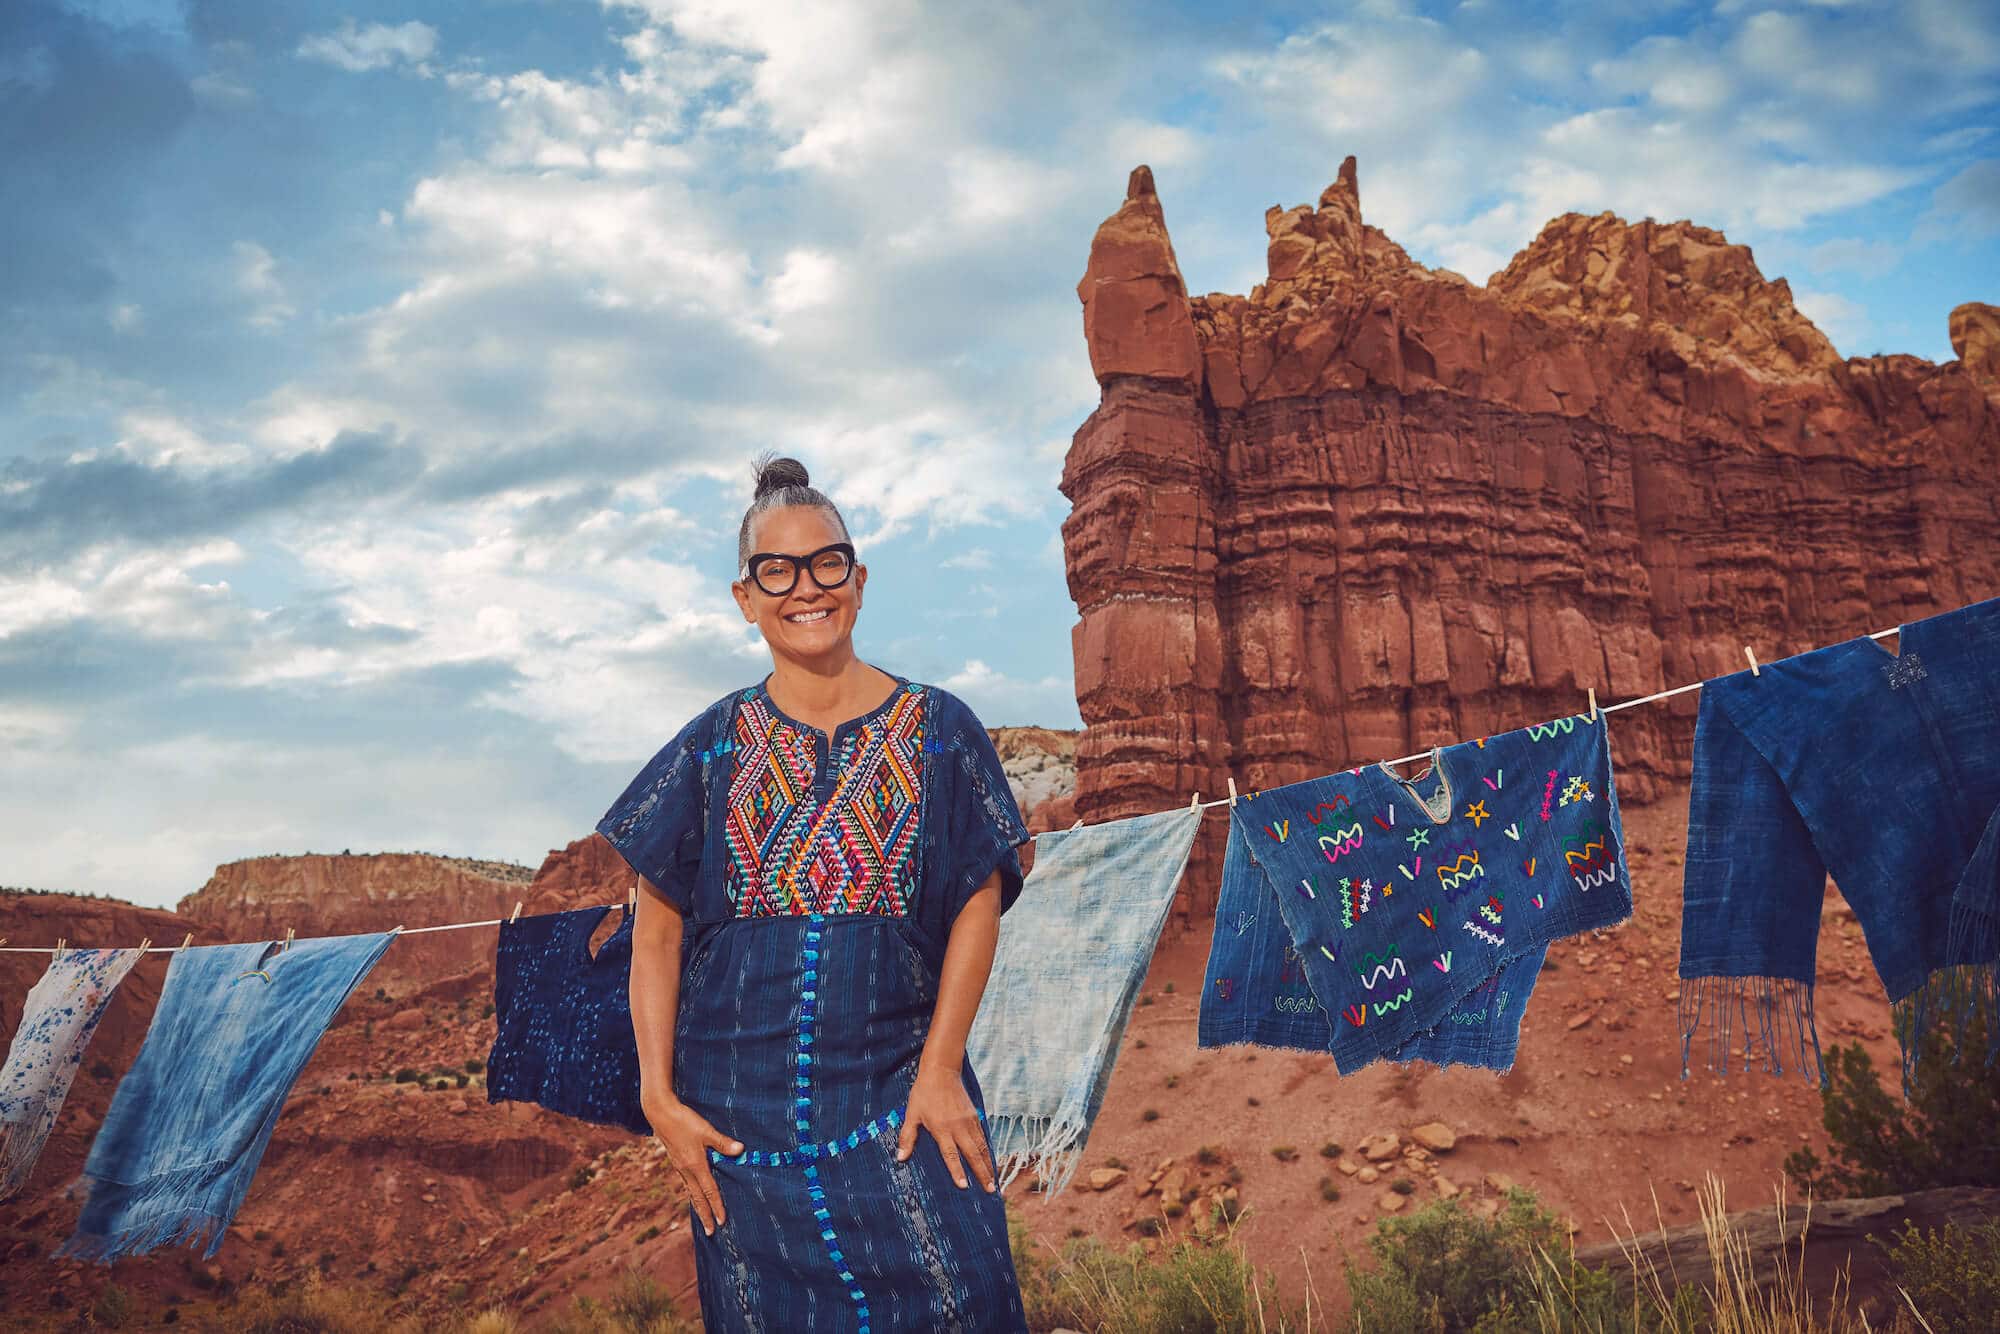 Amy Yeung, 4Kinship founder, standing with some of her garments against a striking background of the New Mexico mountains